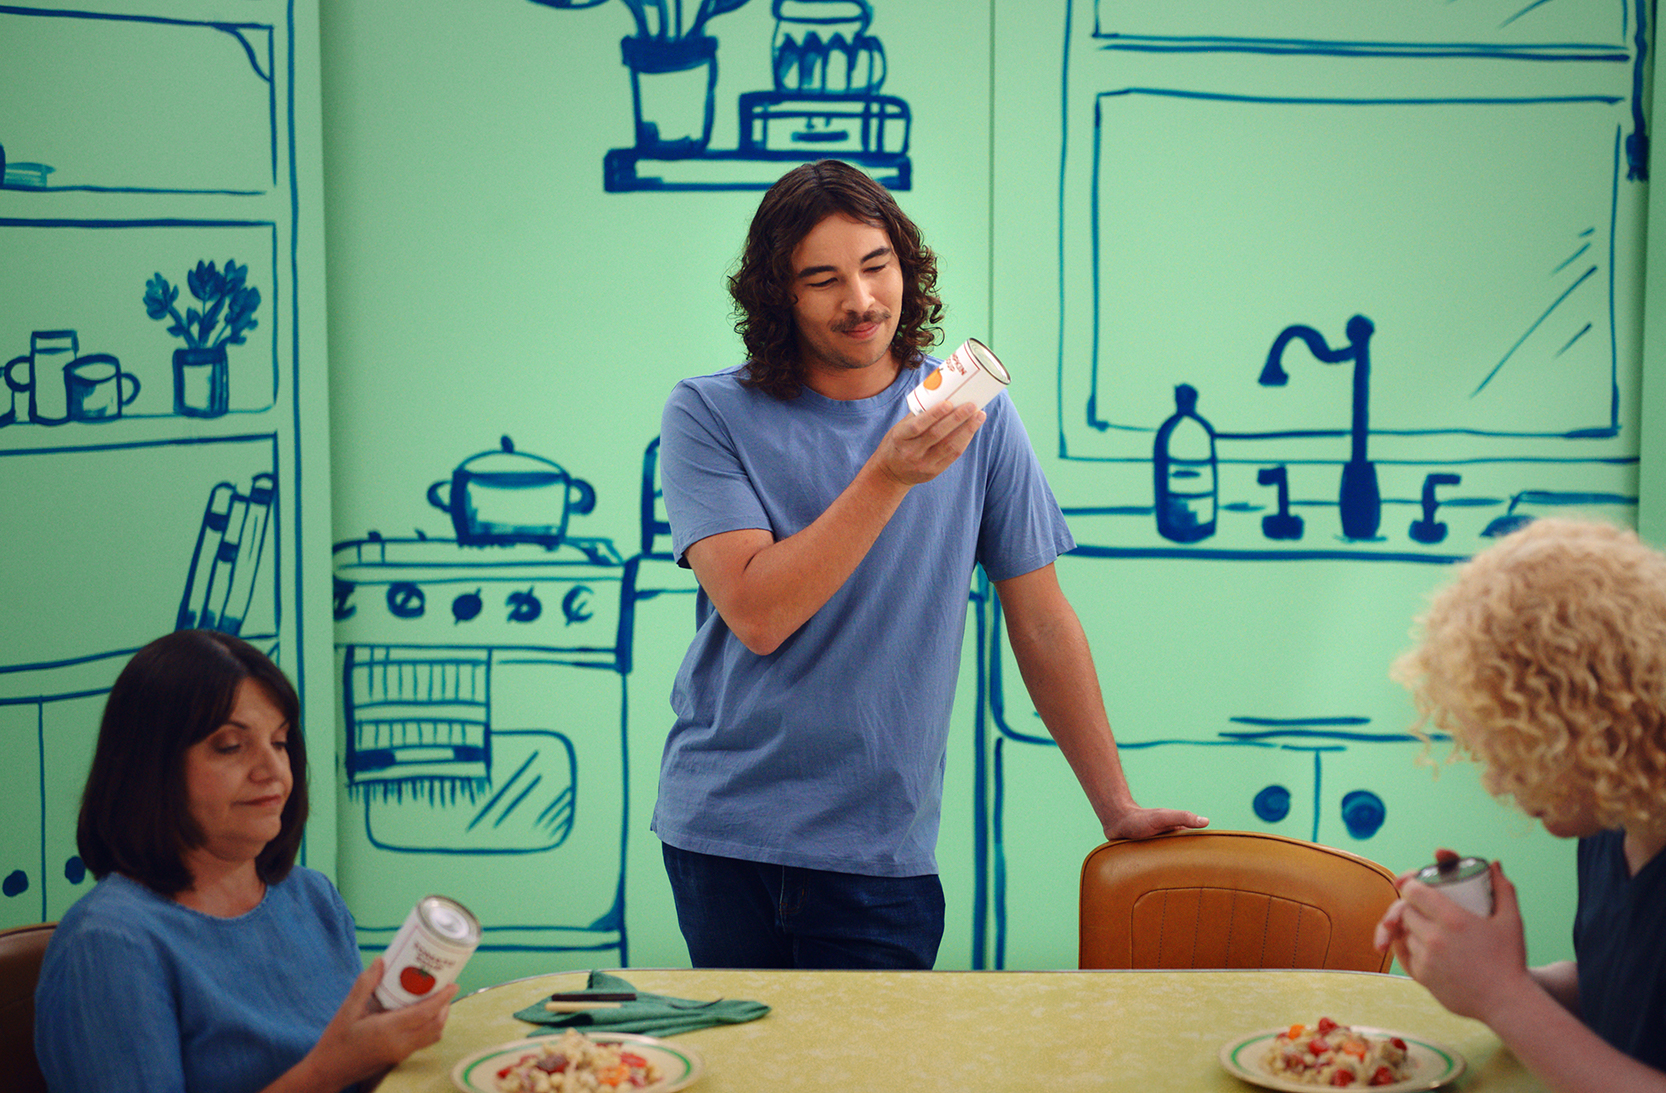 A man in a blue t-shirt is standing up at a kitchen table, holding a can up close to his face to read the packaging. Sitting at the table with him is a brunette lady and a man with curly blonde hair, also trying to read their own cans. They are in front of a green and navy painted kitchen scene.